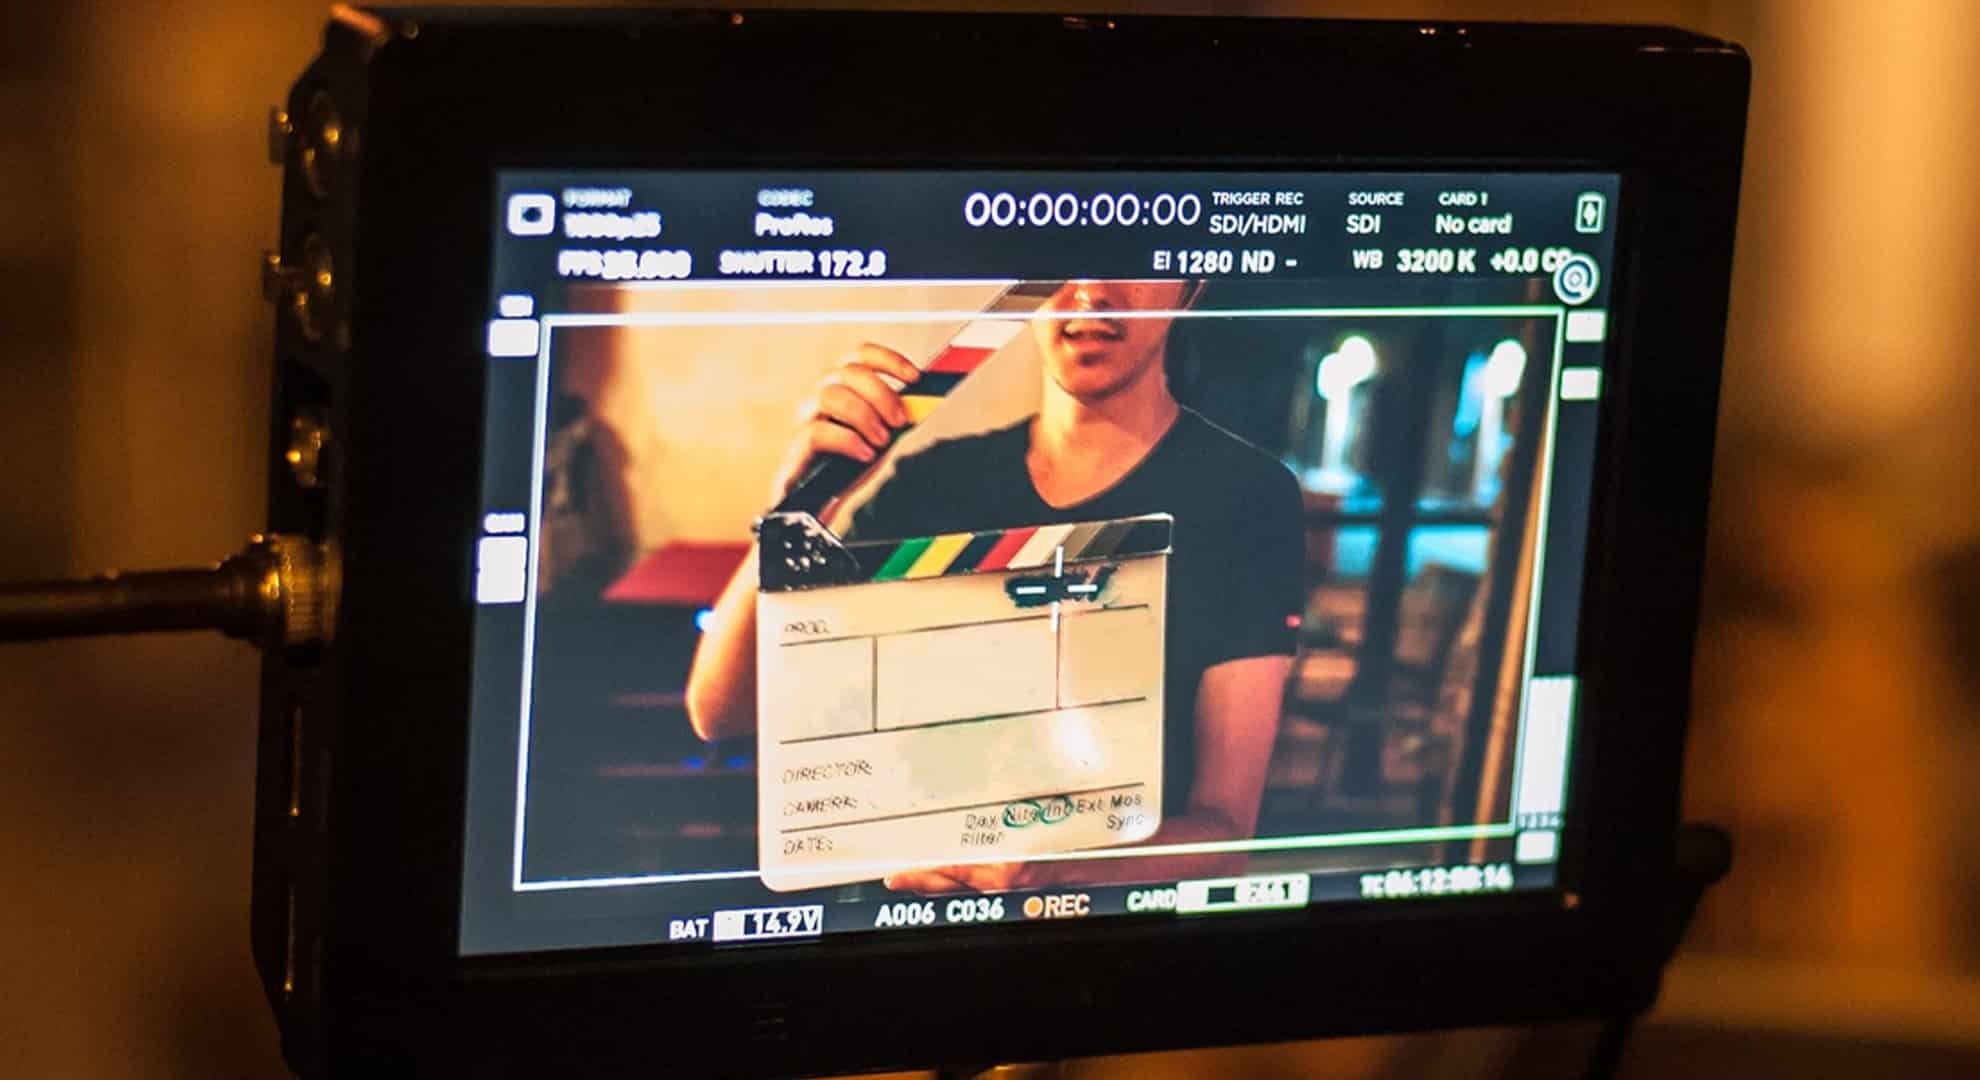 Filming on location. Man holding a clapper board in front of the camera, the filming process. 